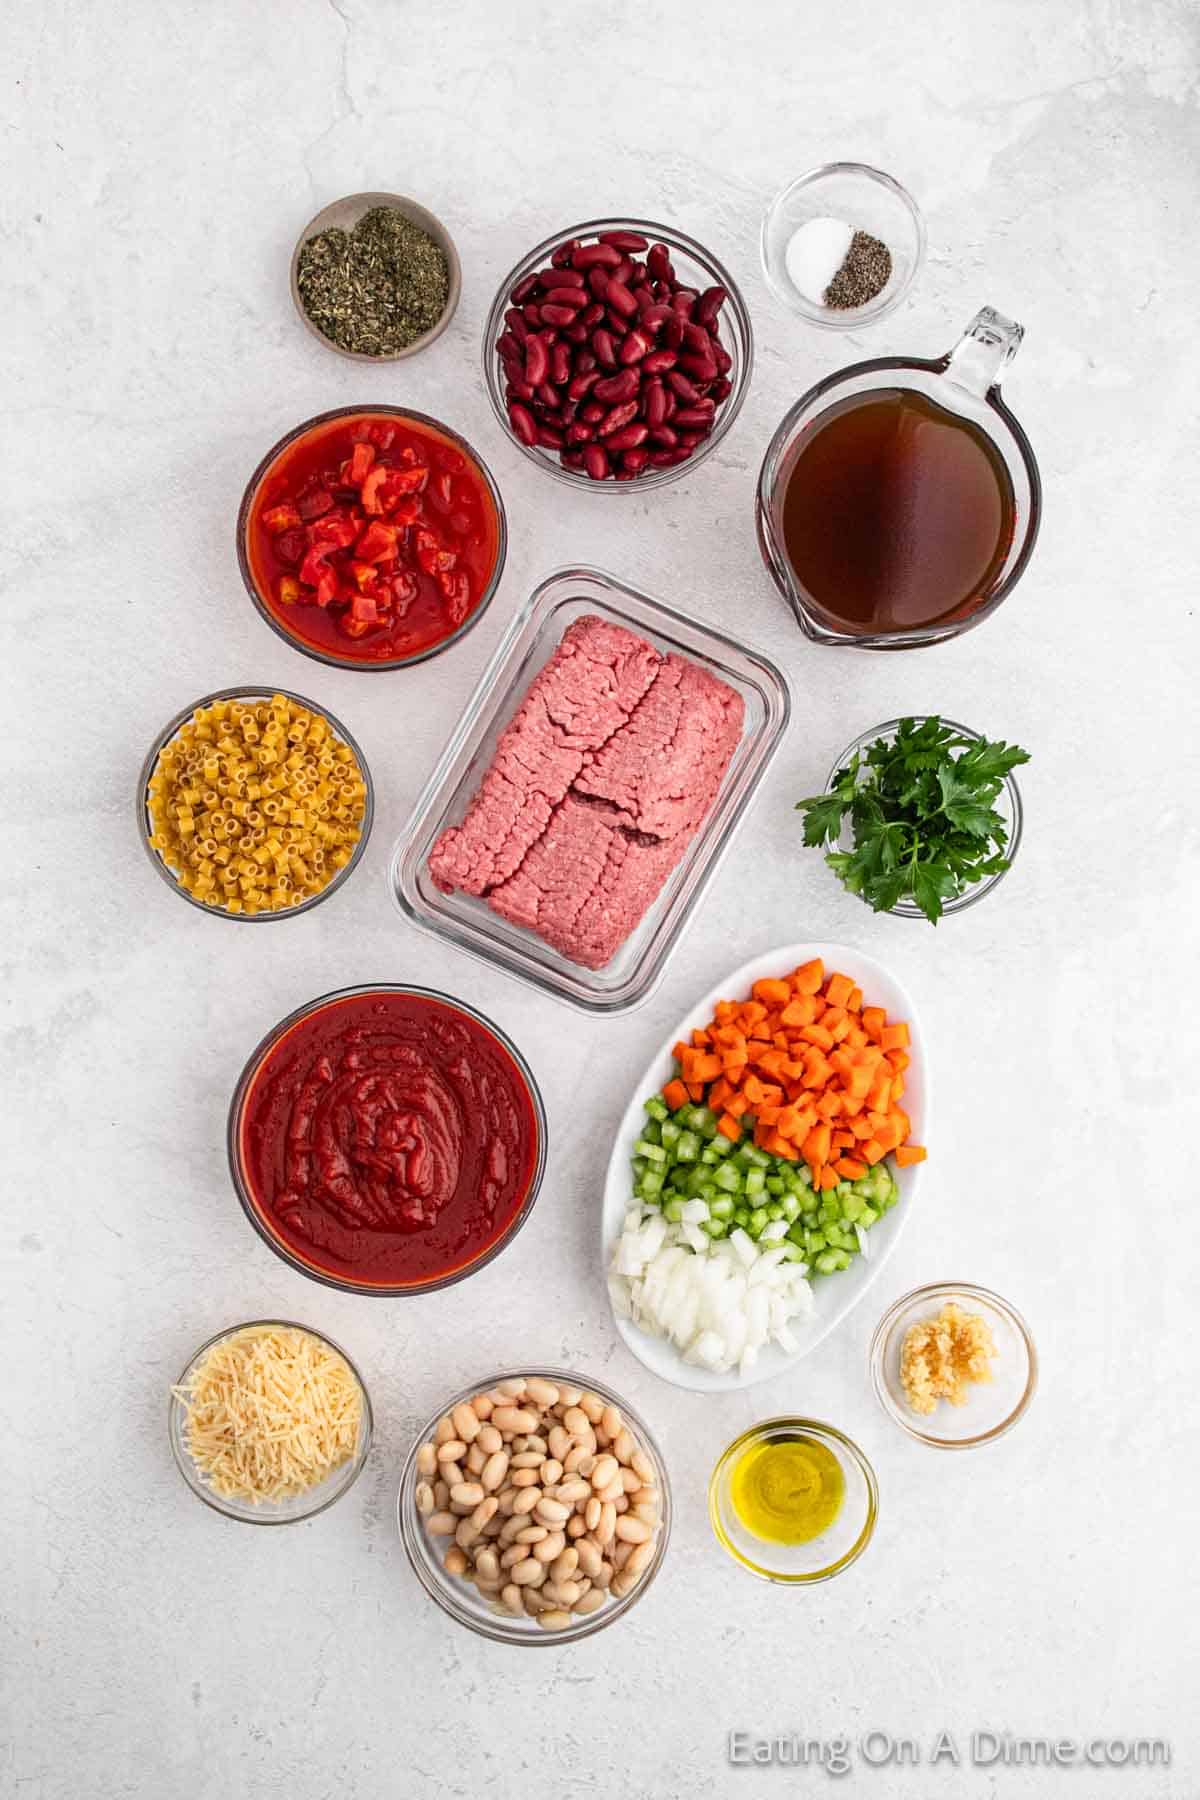 A flat lay of Pasta Fagioli Soup ingredients on a white surface, featuring ground meat, kidney beans, white beans, diced tomatoes, beef broth, macaroni, tomato sauce, diced carrots, diced celery, diced onions, shredded cheese, olive oil, parsley and seasonings.